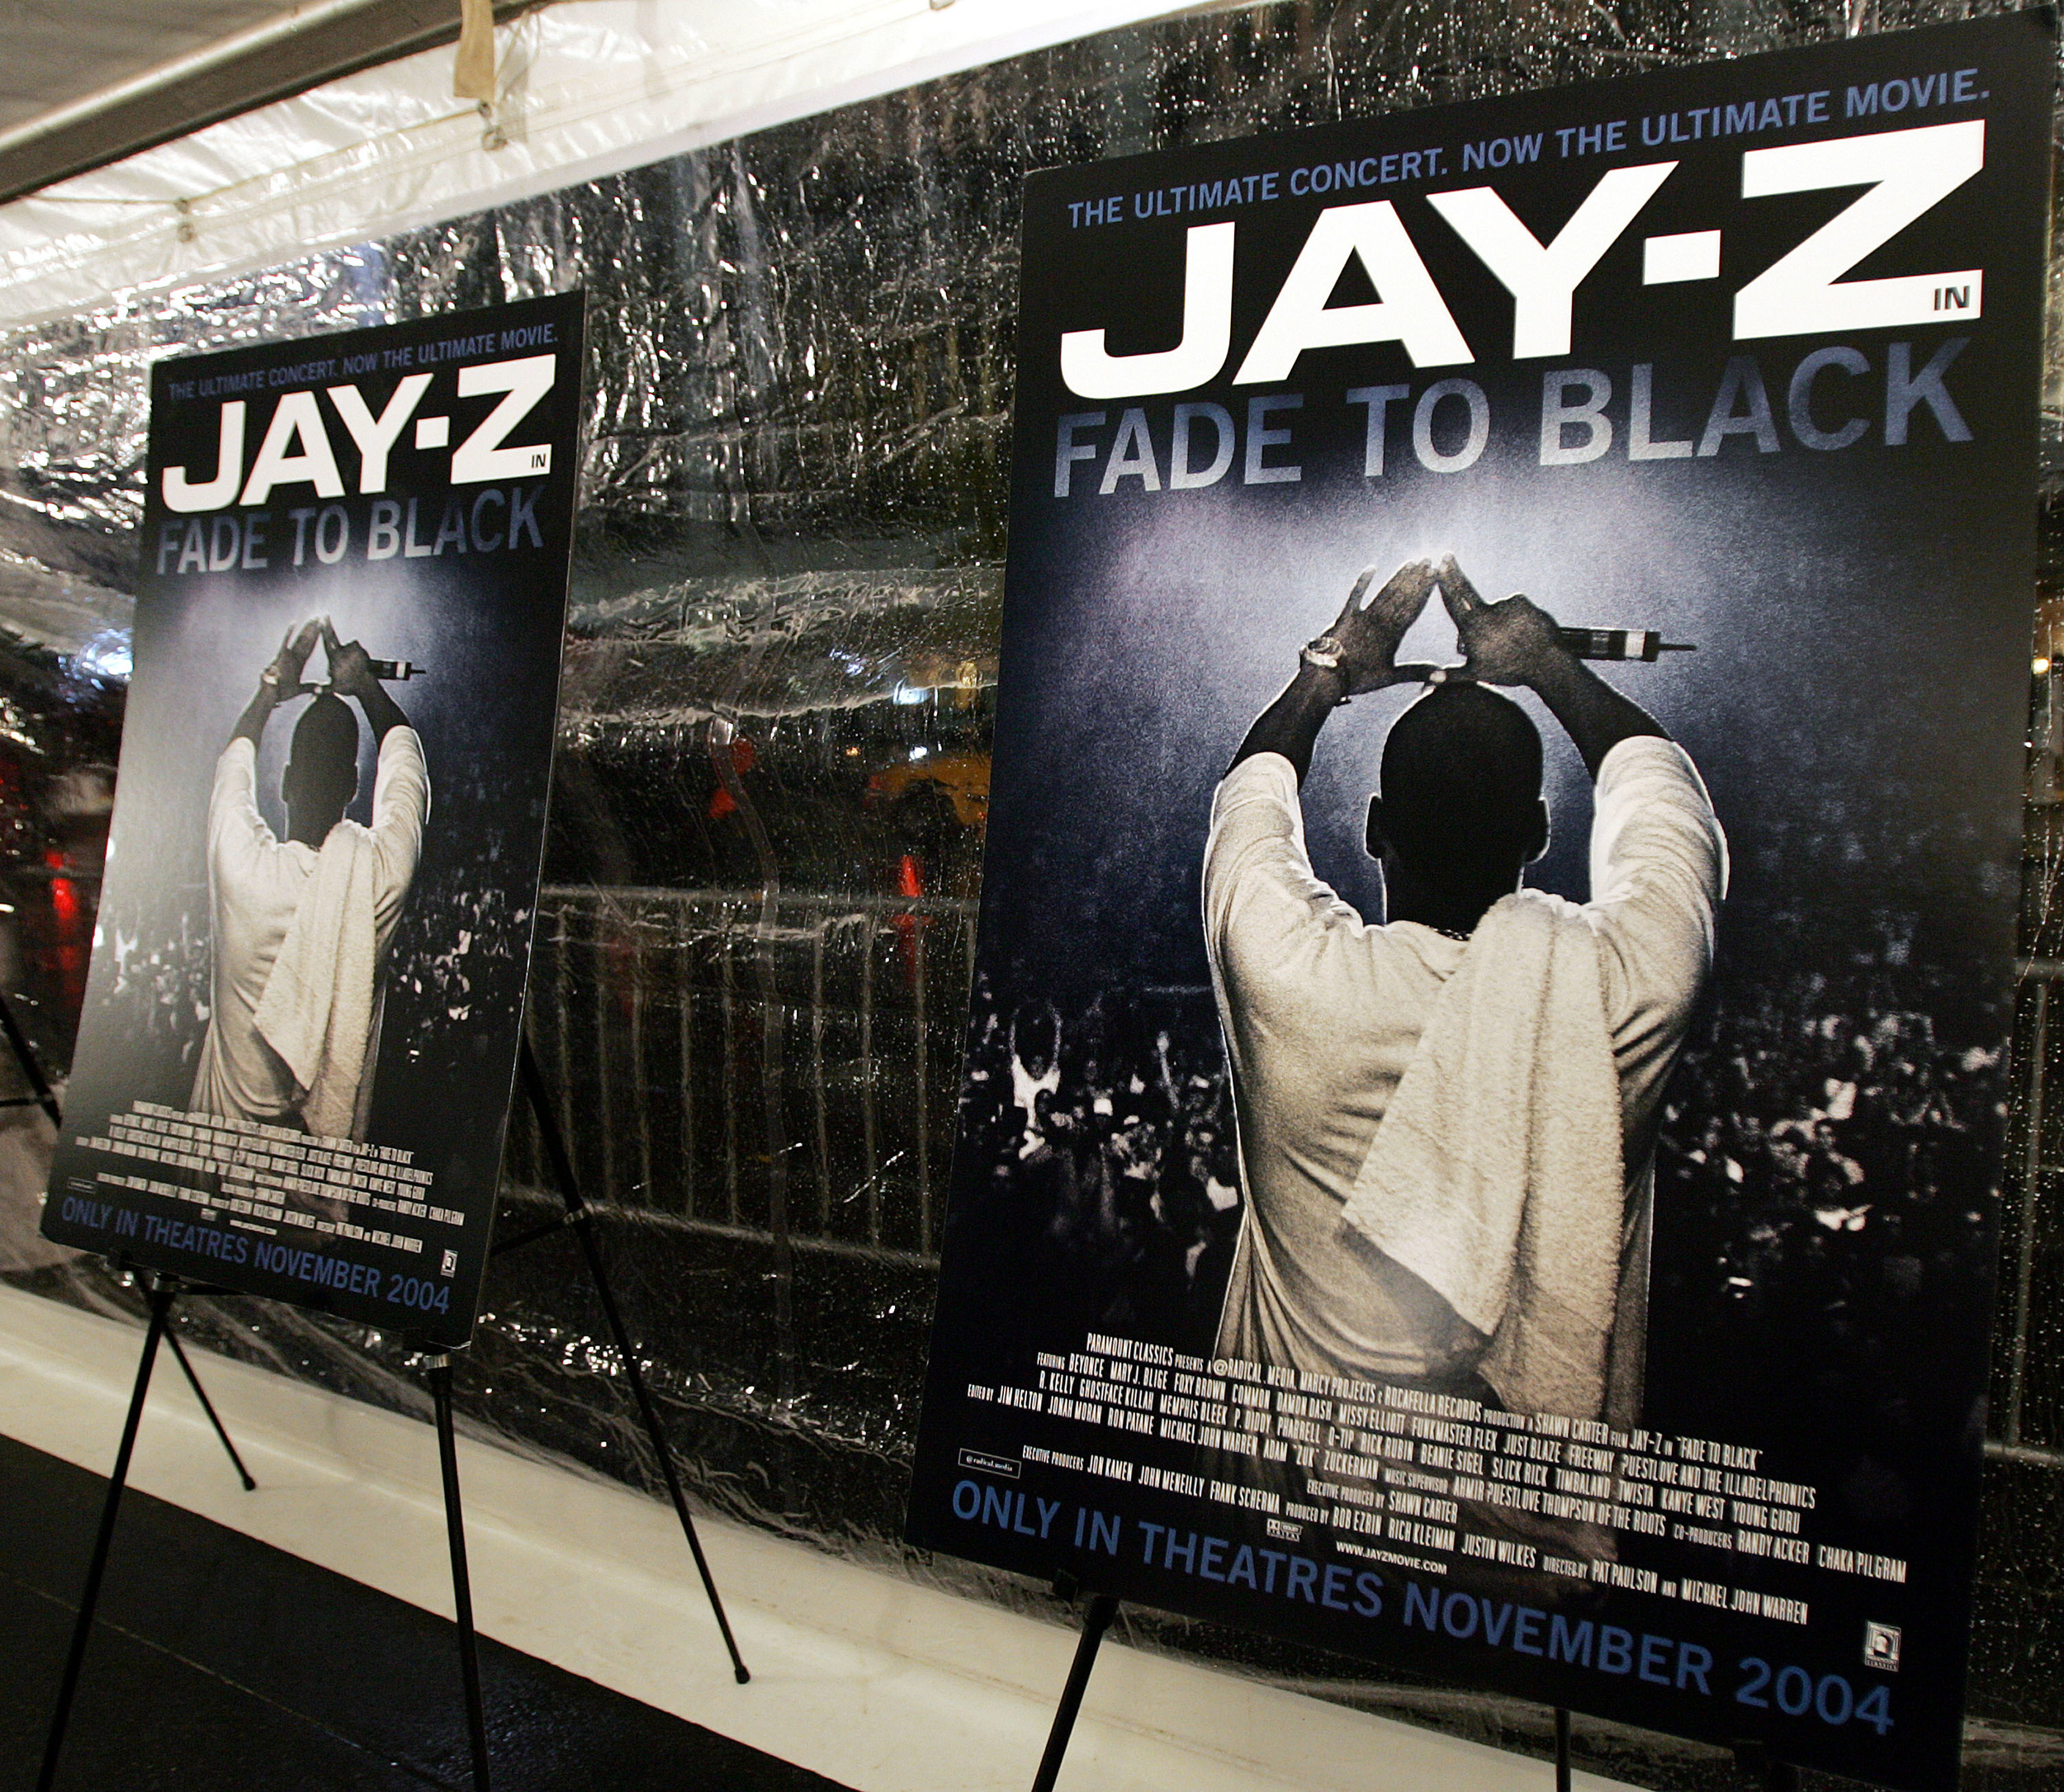 <p>This 2004 documentary has lost some of its impact—it was intended as a benediction on the occasion of Jay-Z’s retirement, which lasted less than two years. And the behind-the-scenes look at "The Black Album" comes off as standard promotional fare. But the Madison Square Garden concert at the center of the film, featuring Jay-Z, Mary J. Blige, Foxy Brown, Diddy, Missy Elliott, Usher, and, of course, Beyoncé, is easily worth anyone’s attention. </p><p>You may also like: <a href='https://www.yardbarker.com/entertainment/articles/20_songs_that_should_be_on_your_bruce_springsteen_playlist_121523/s1__38100590'>20 songs that should be on your Bruce Springsteen playlist</a></p>